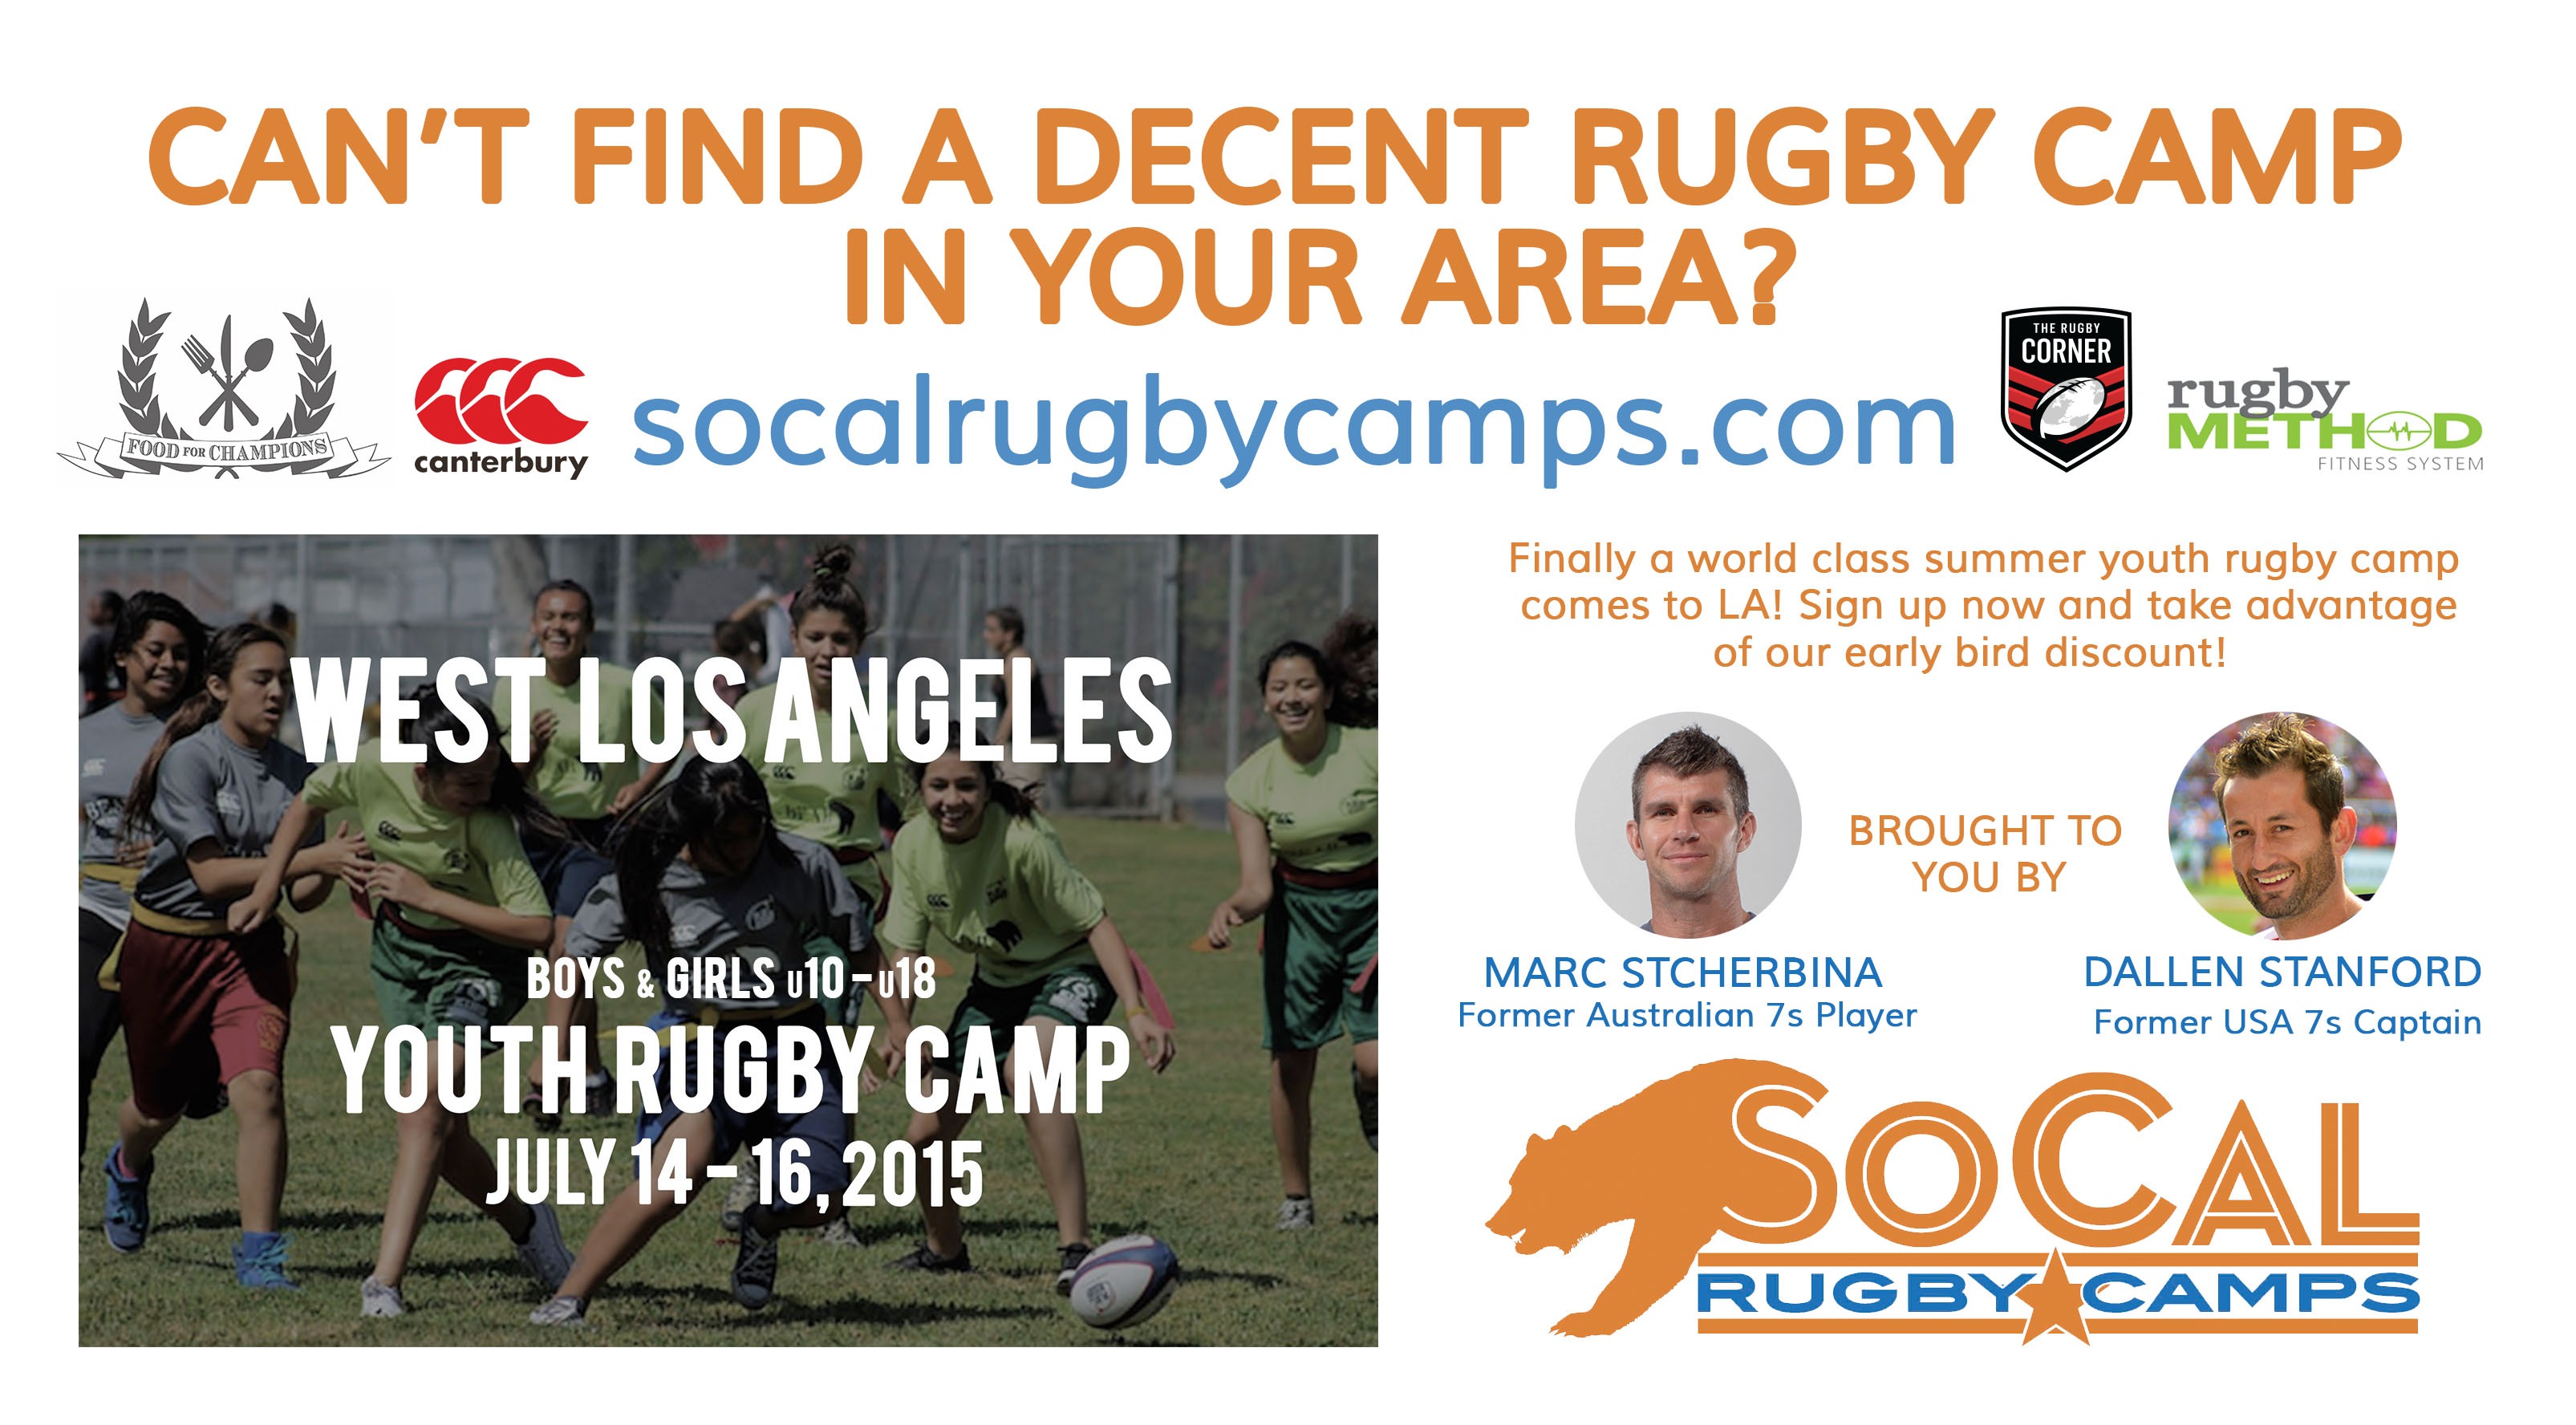 West LA Rugby Camp